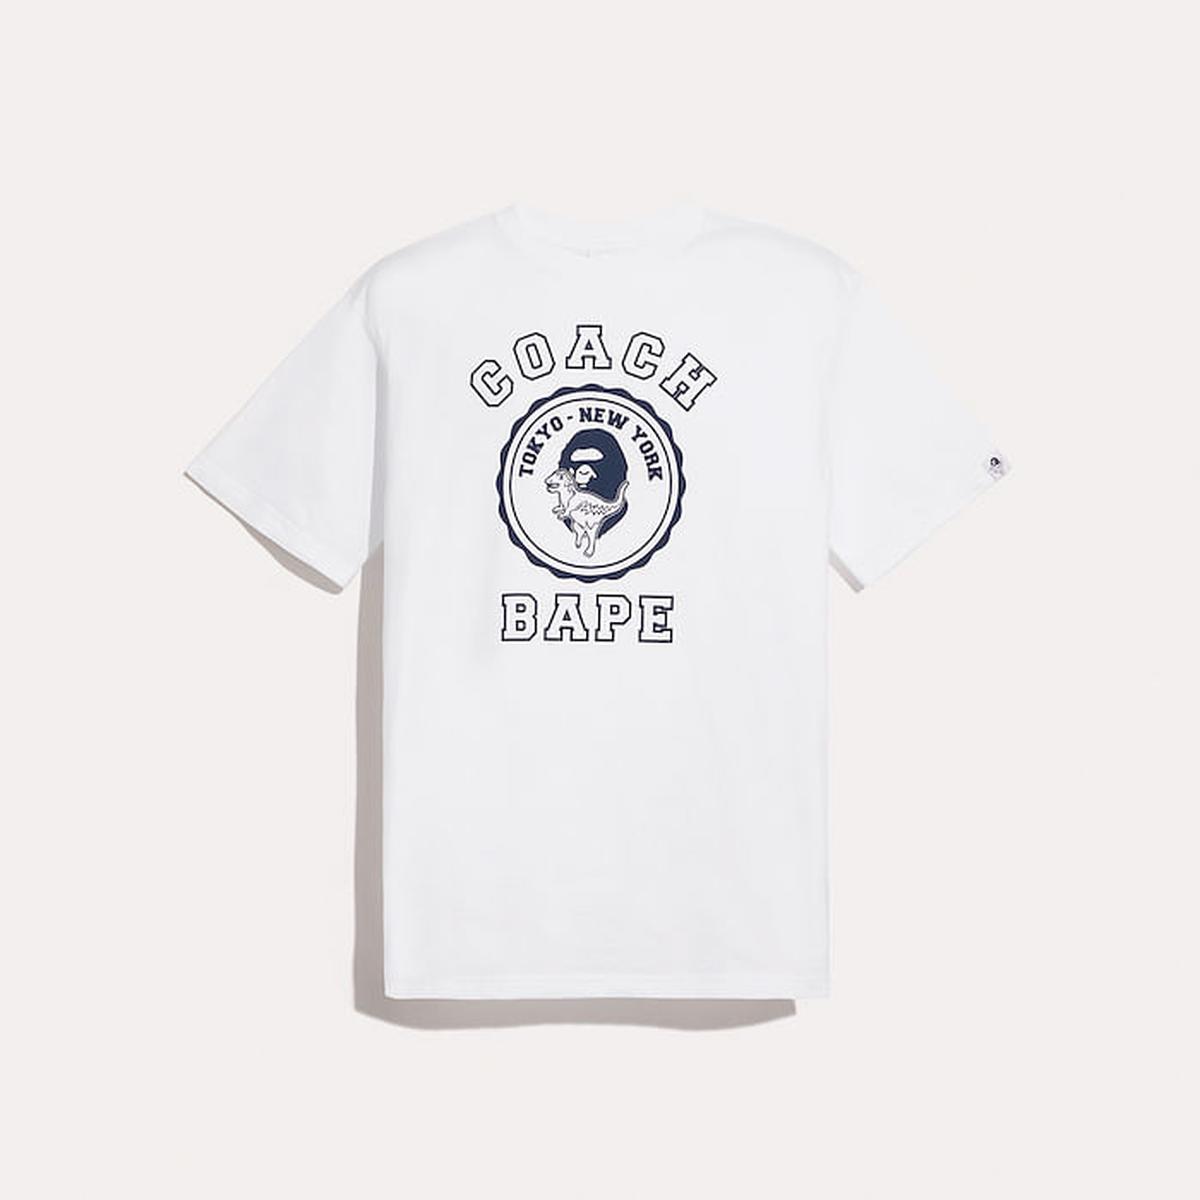 BAPE X Coach's New Collection Features Megan Thee Stallion And More |  Harper's Bazaar Singapore